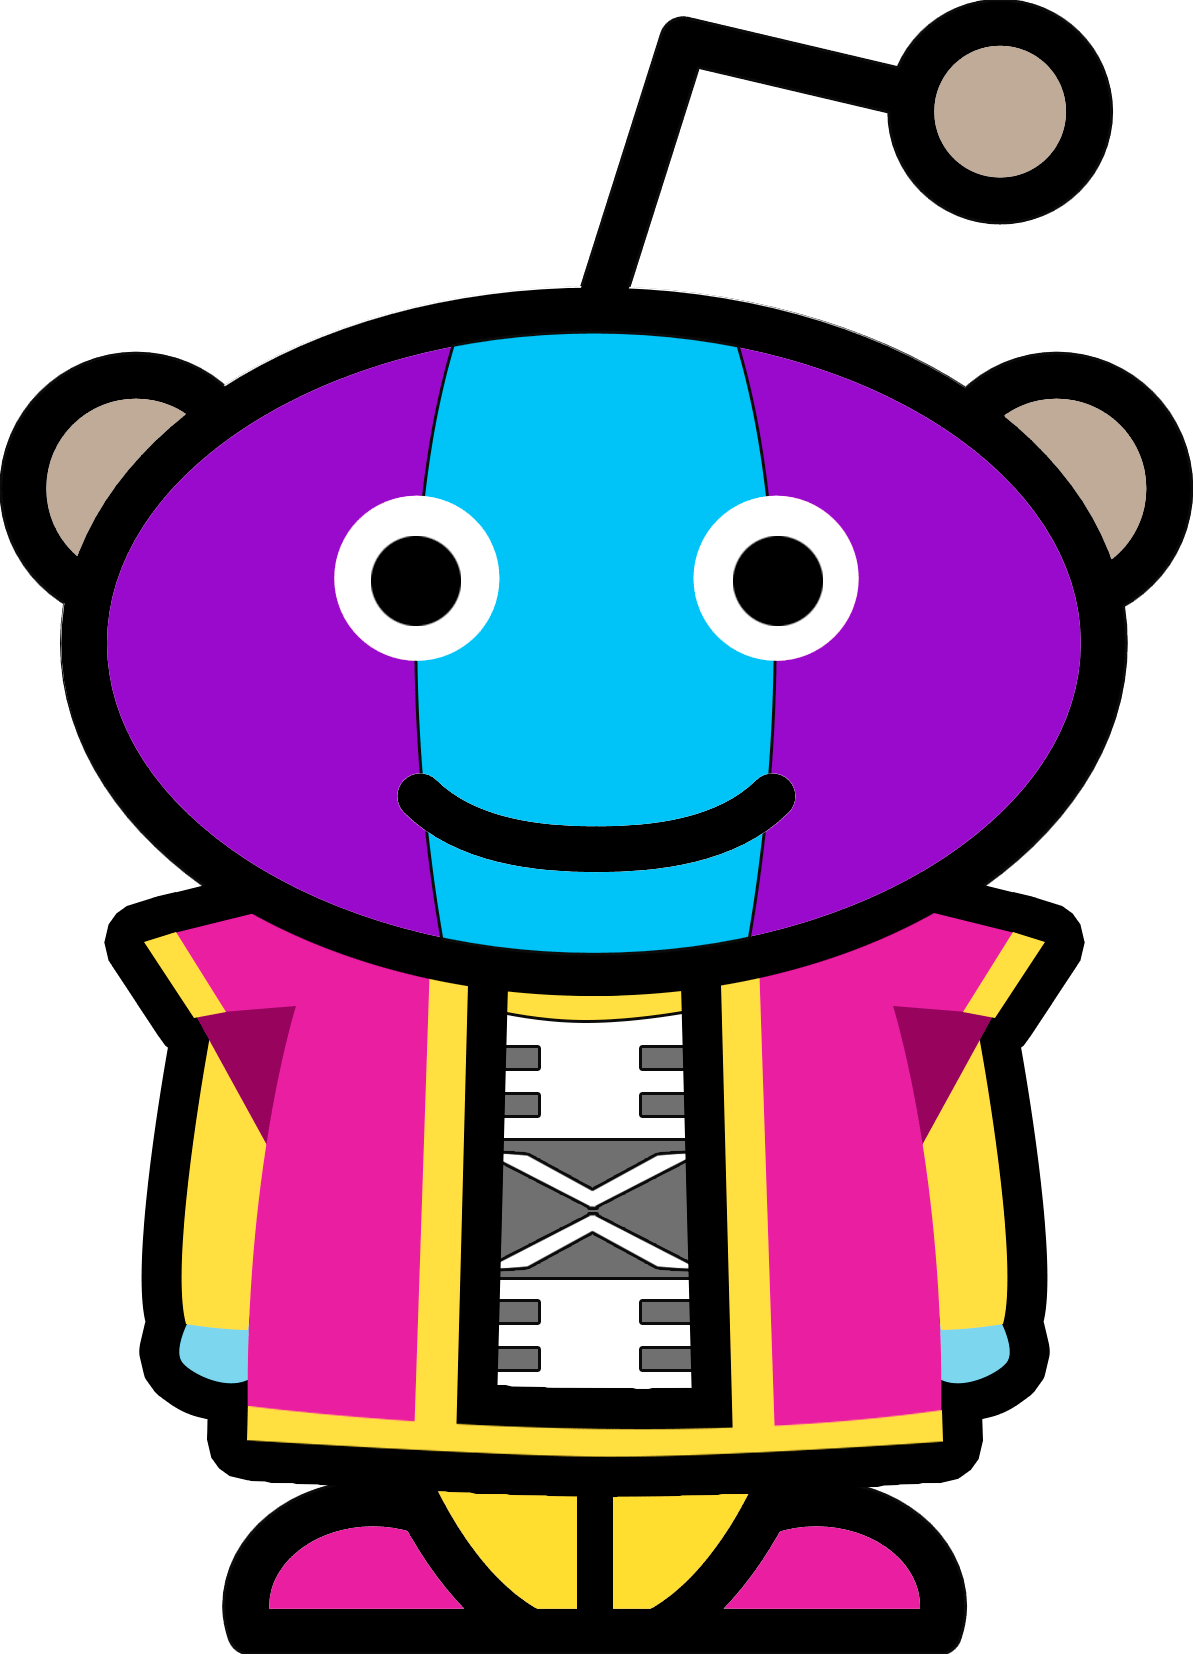 Colorful Robot Character Illustration PNG